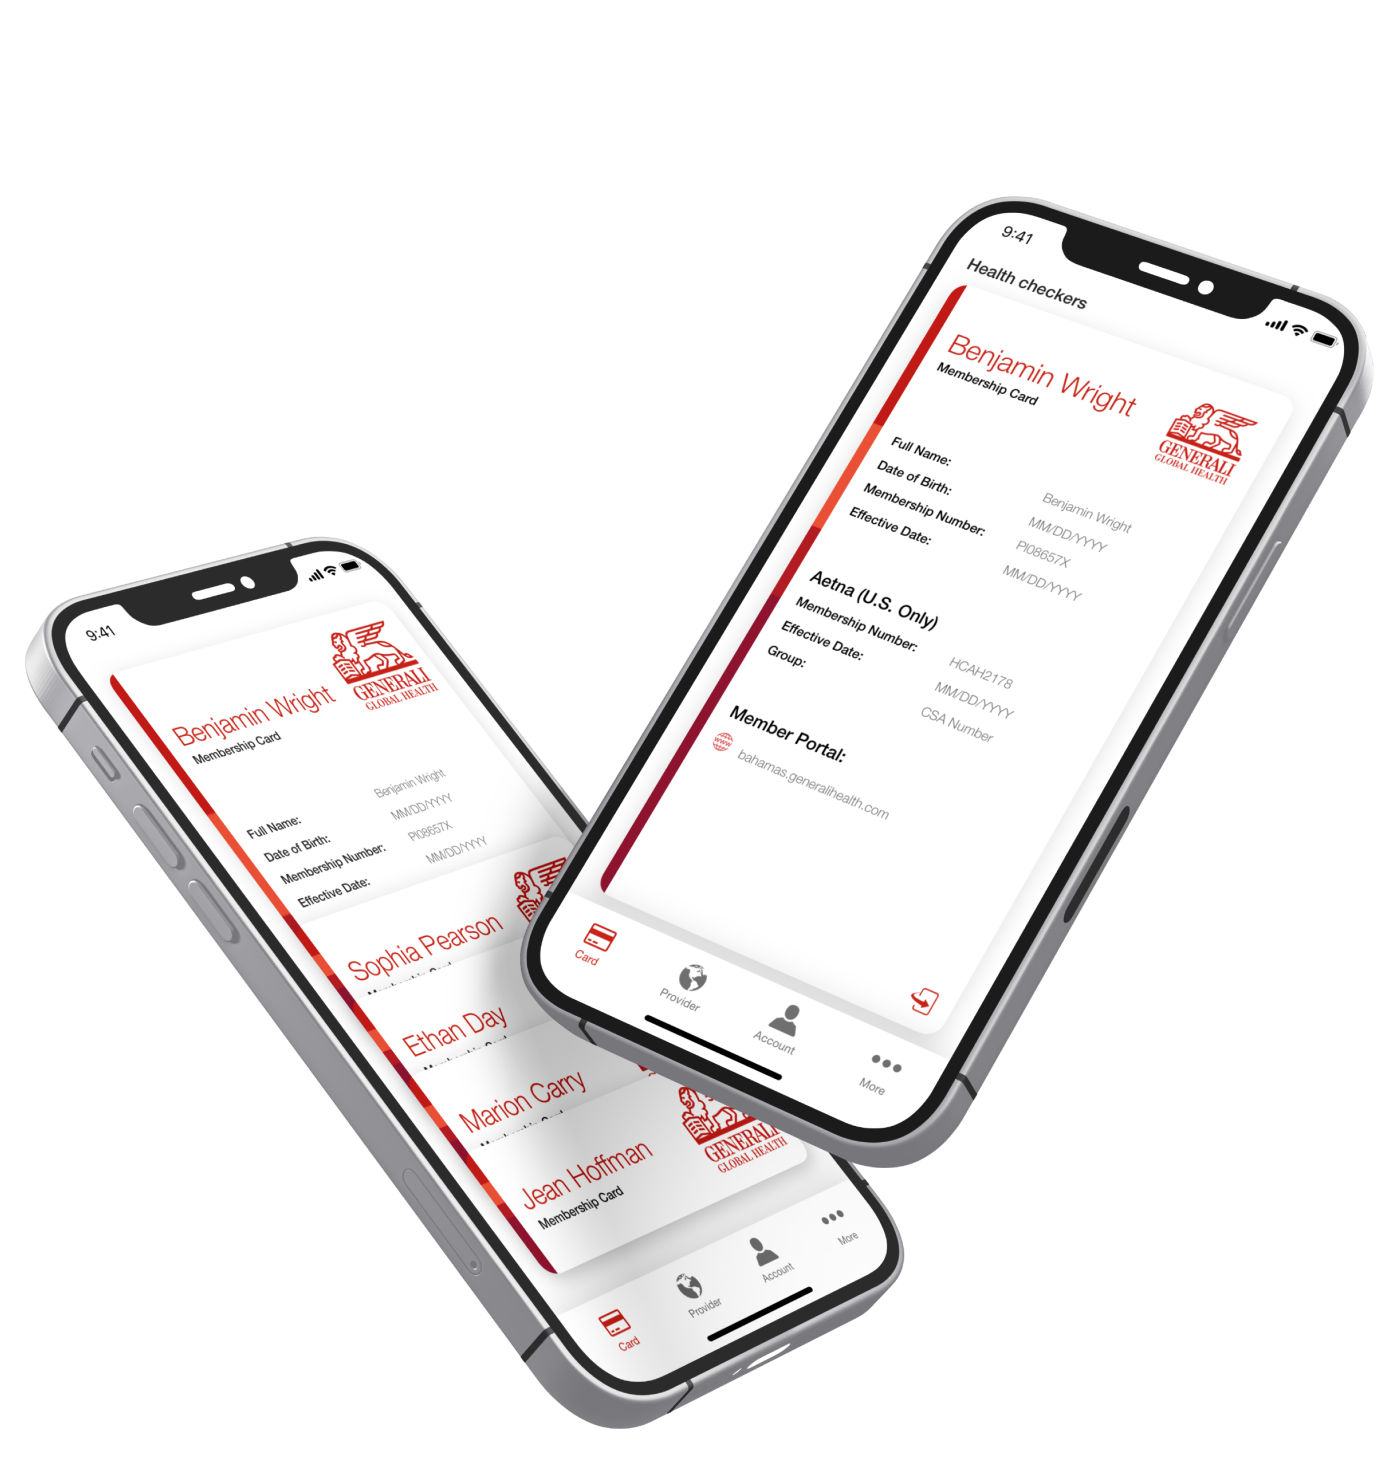 Generali Insurance iOS and Android Mobile App Screen